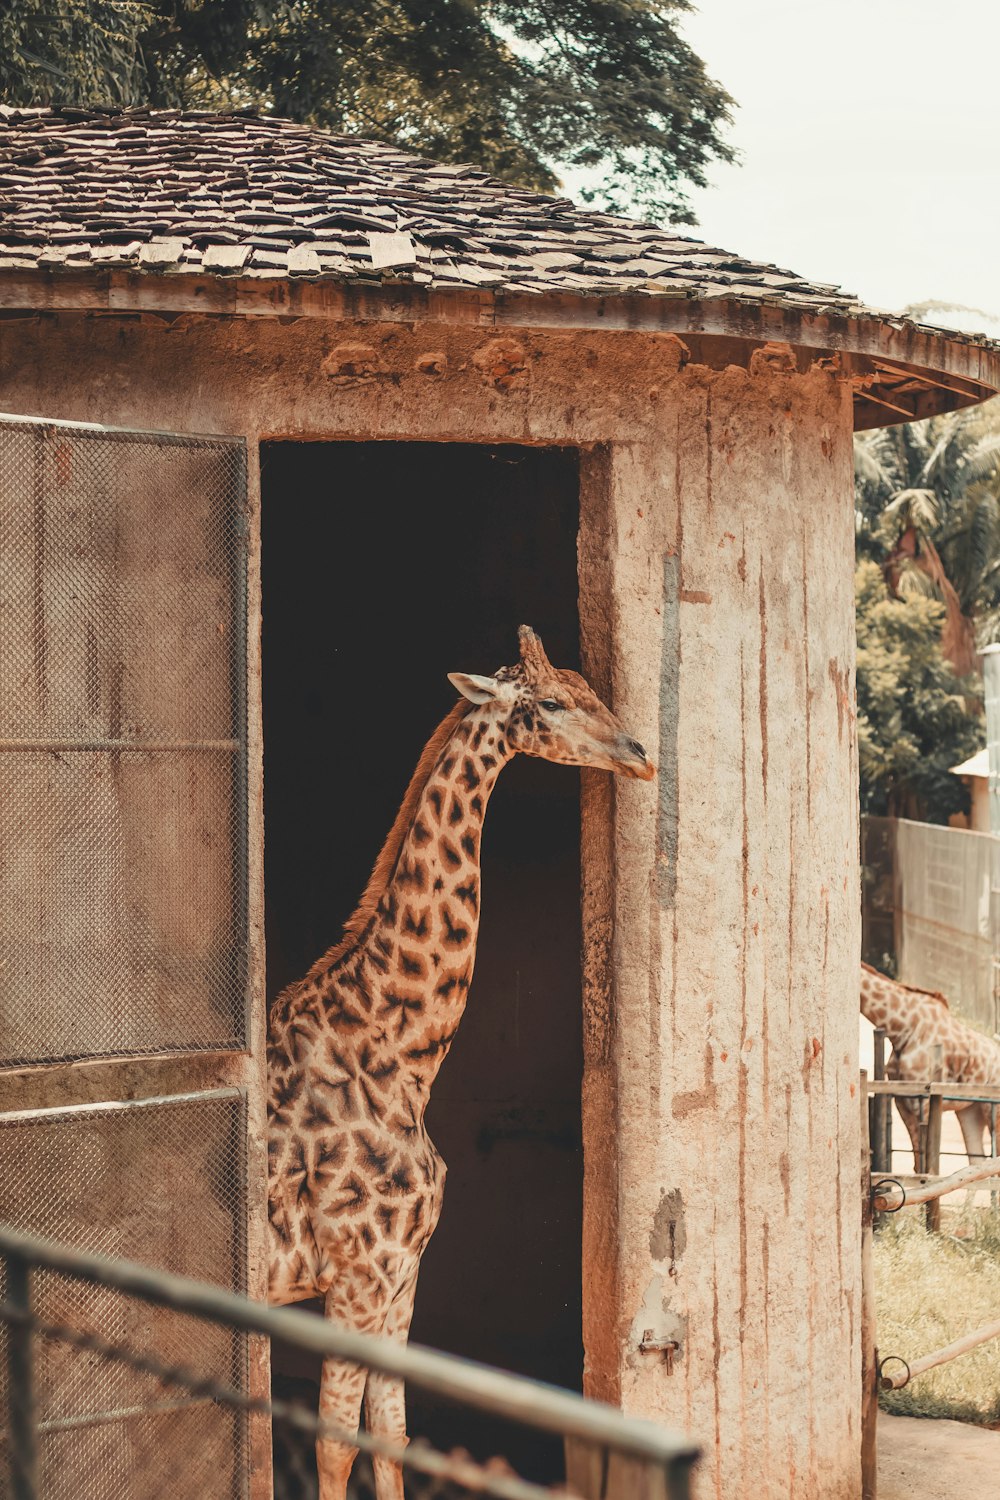 brown and black giraffe in cage